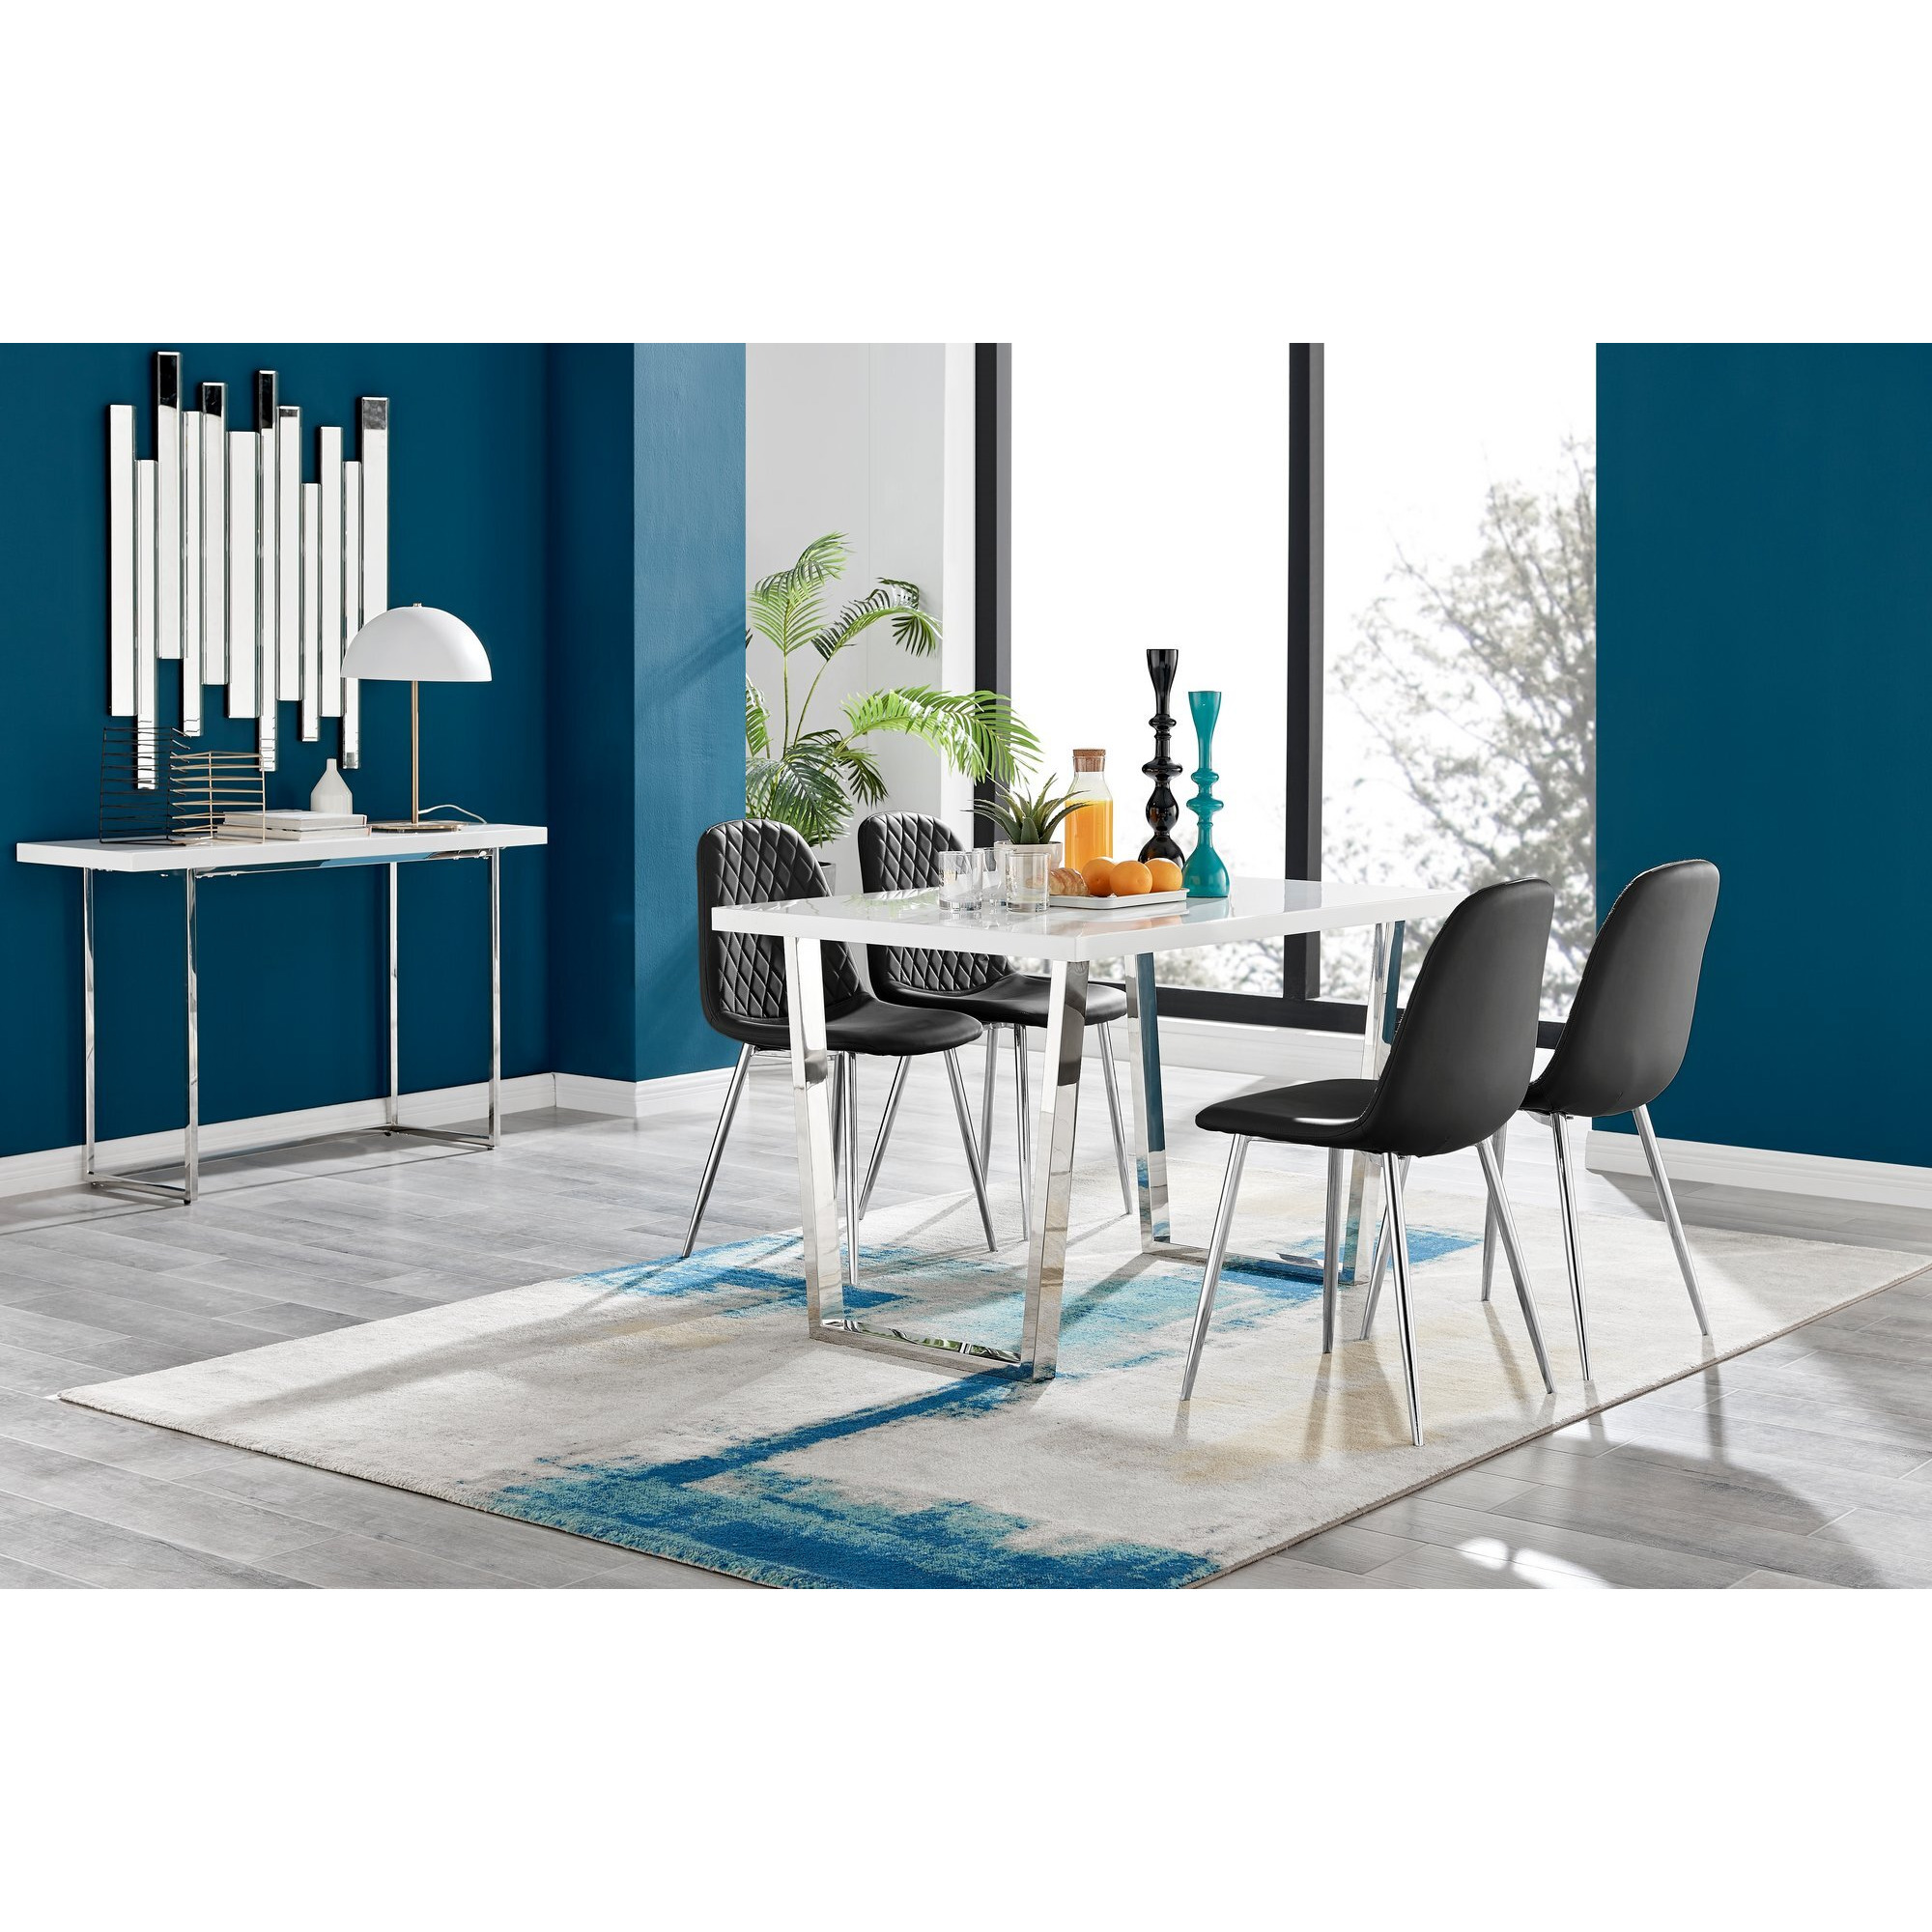 Kylo White High Gloss Dining Table & 4 Corona Silver Chairs